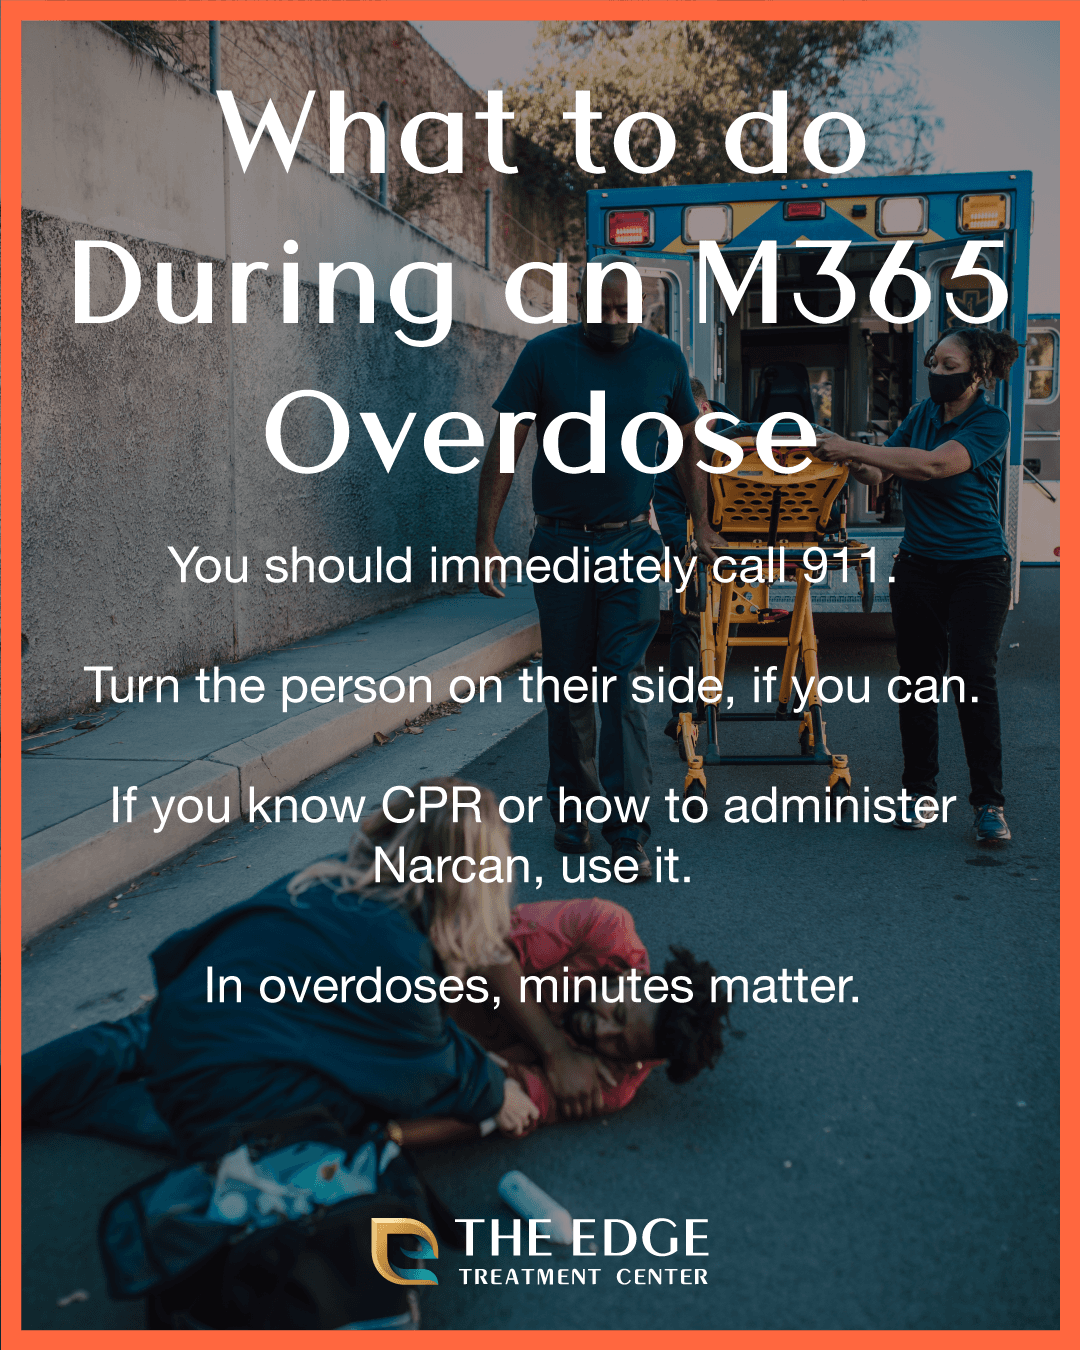 What to do During an M365 Overdose